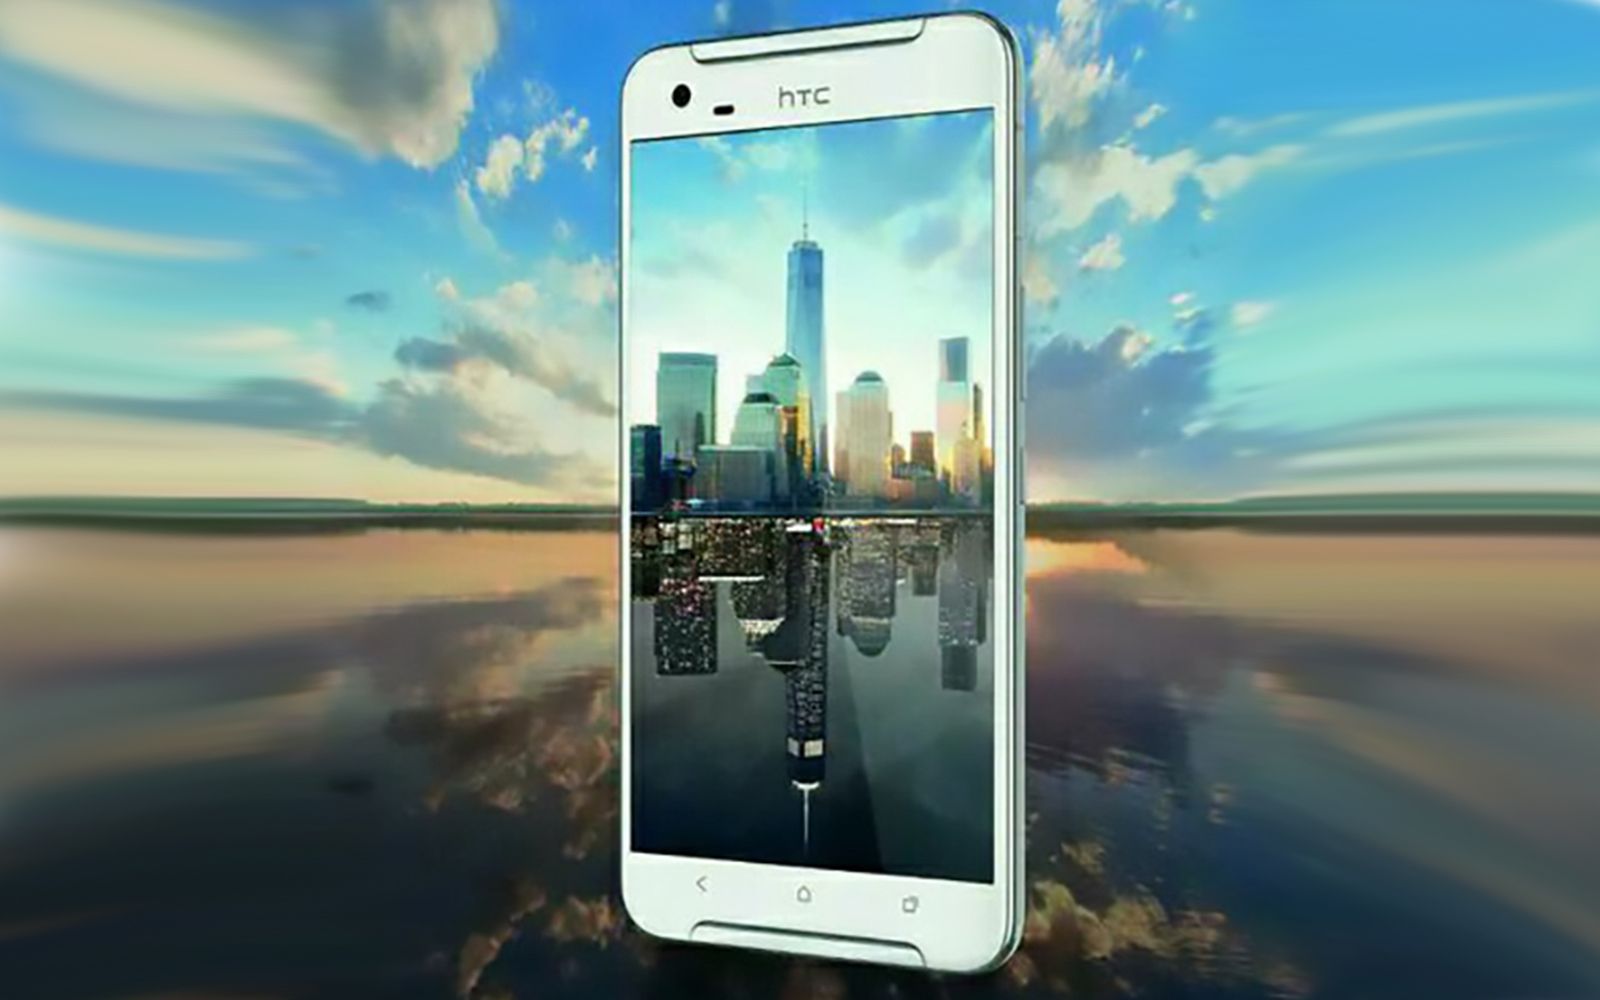 htc one x9 leaks with specs to make a9 look old already image 1